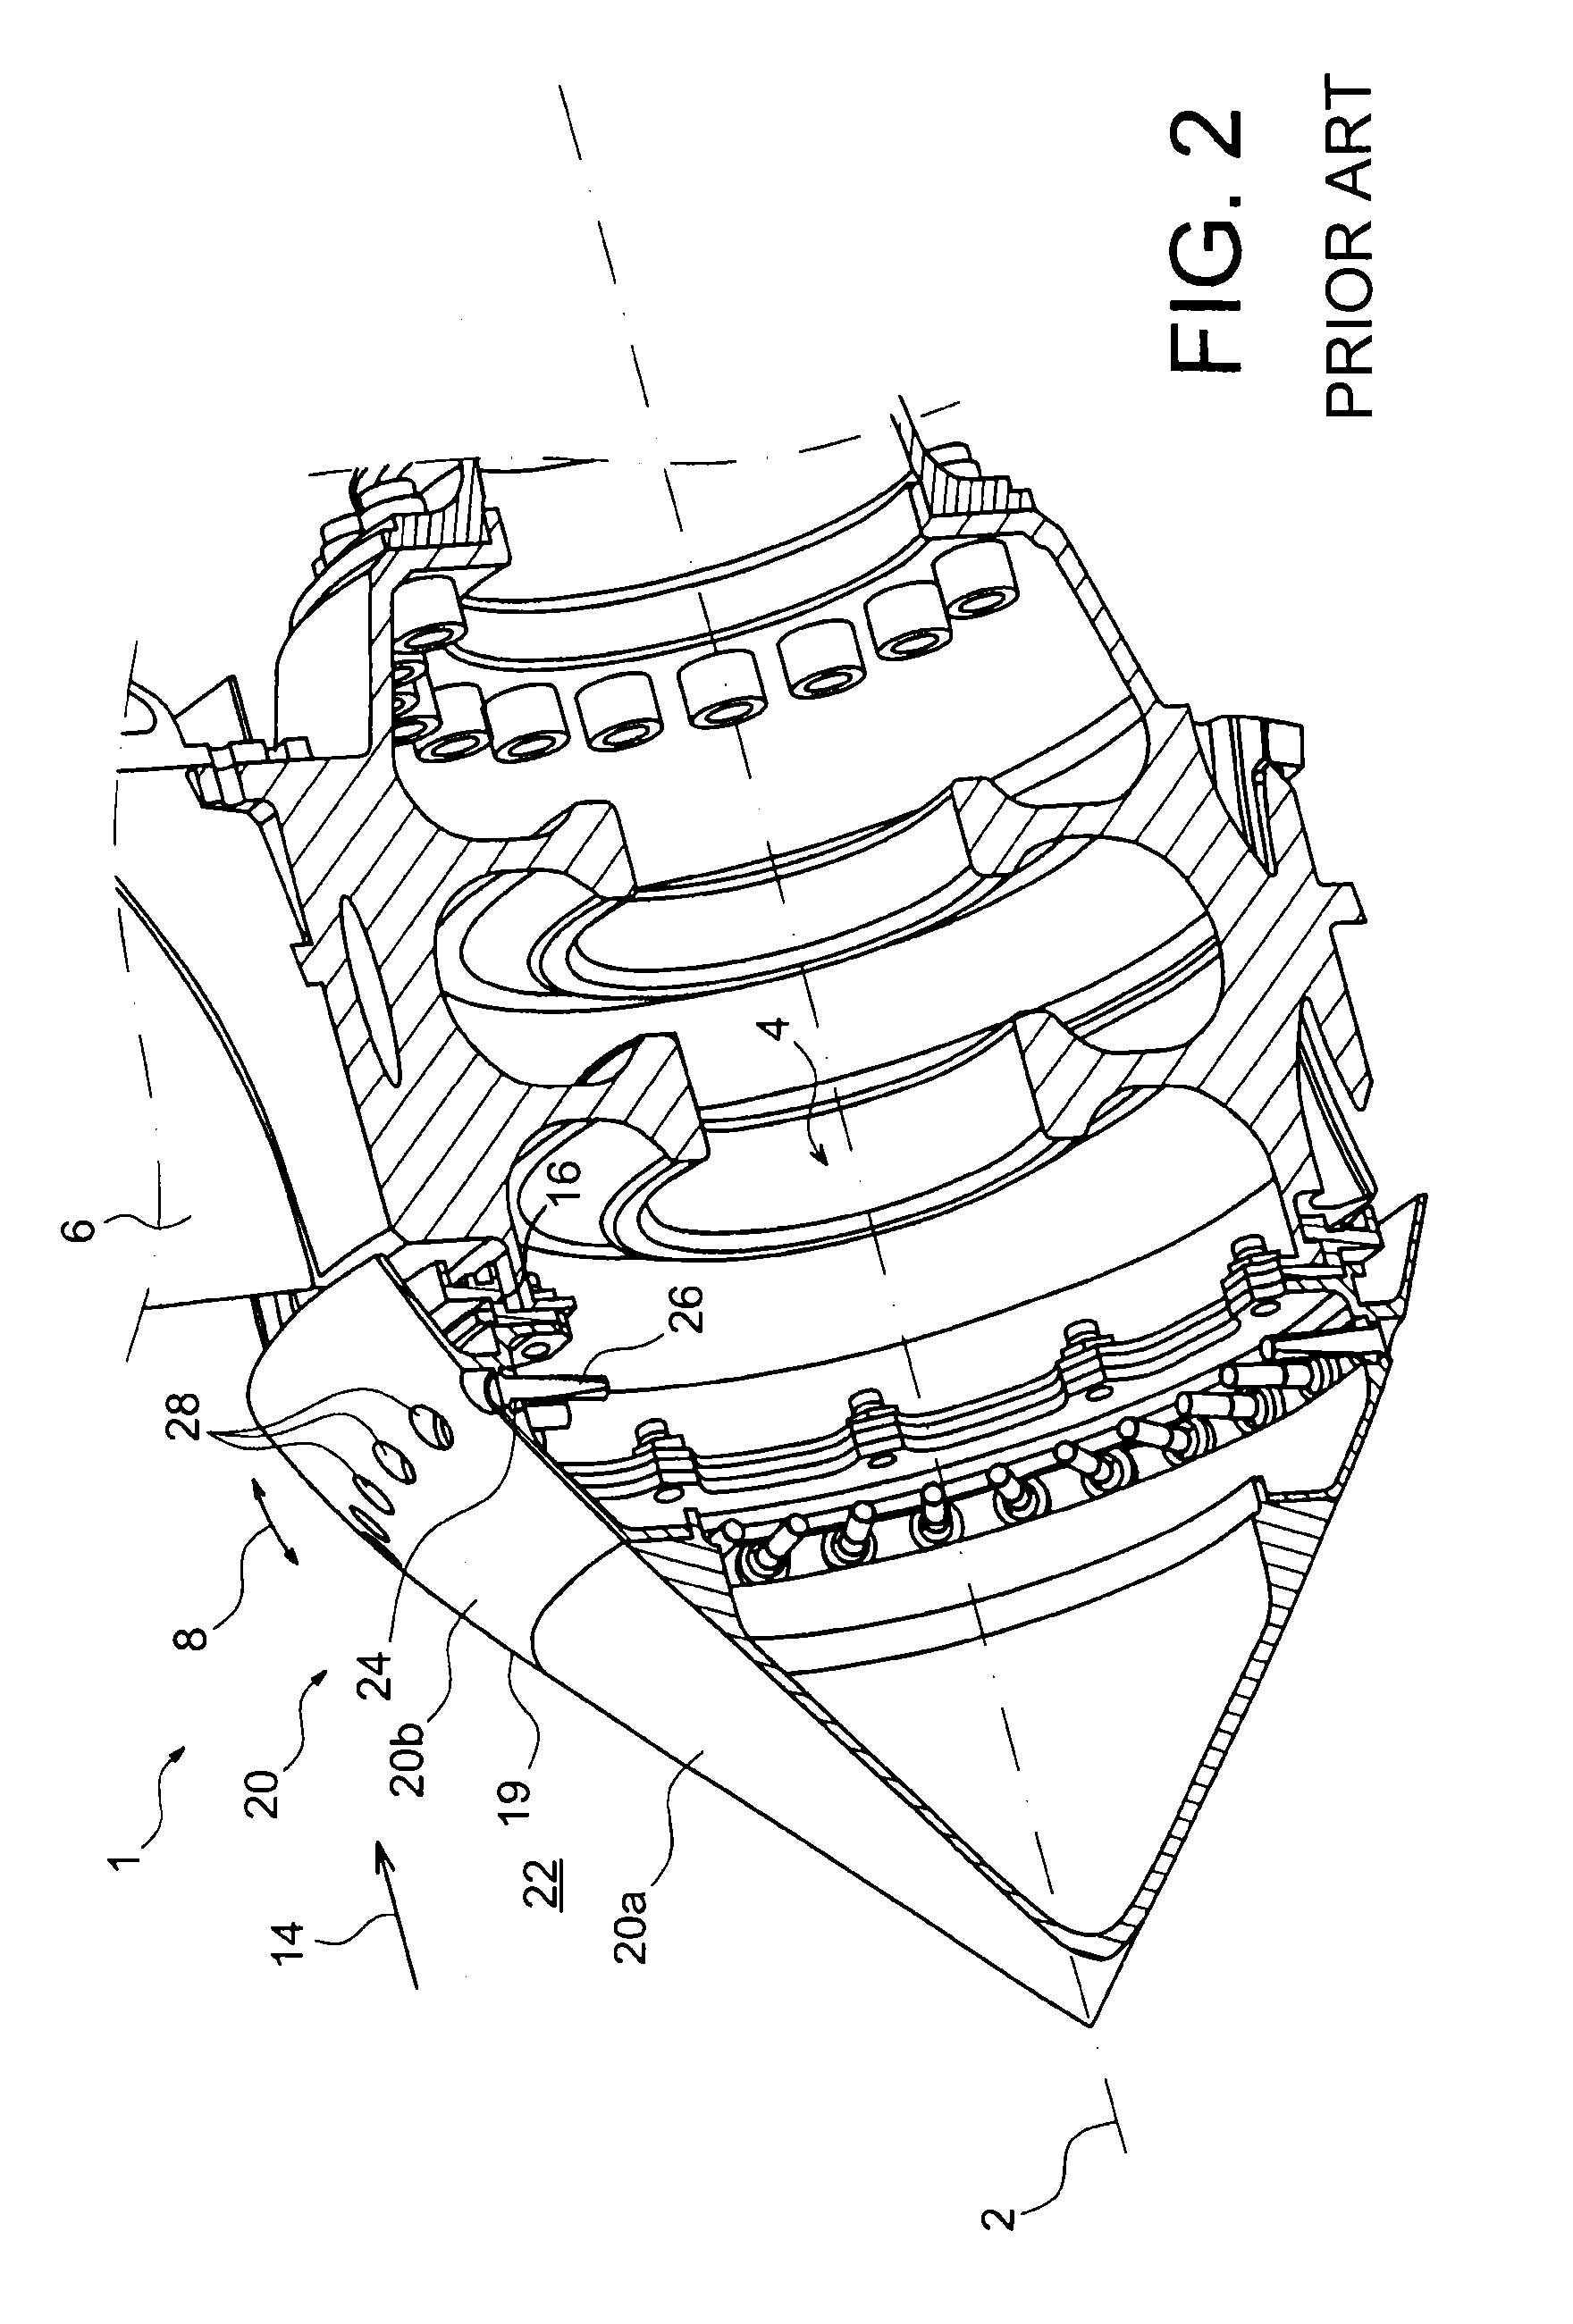 Turbine engine fan comprising a balancing system with blind holes for accommodating masses